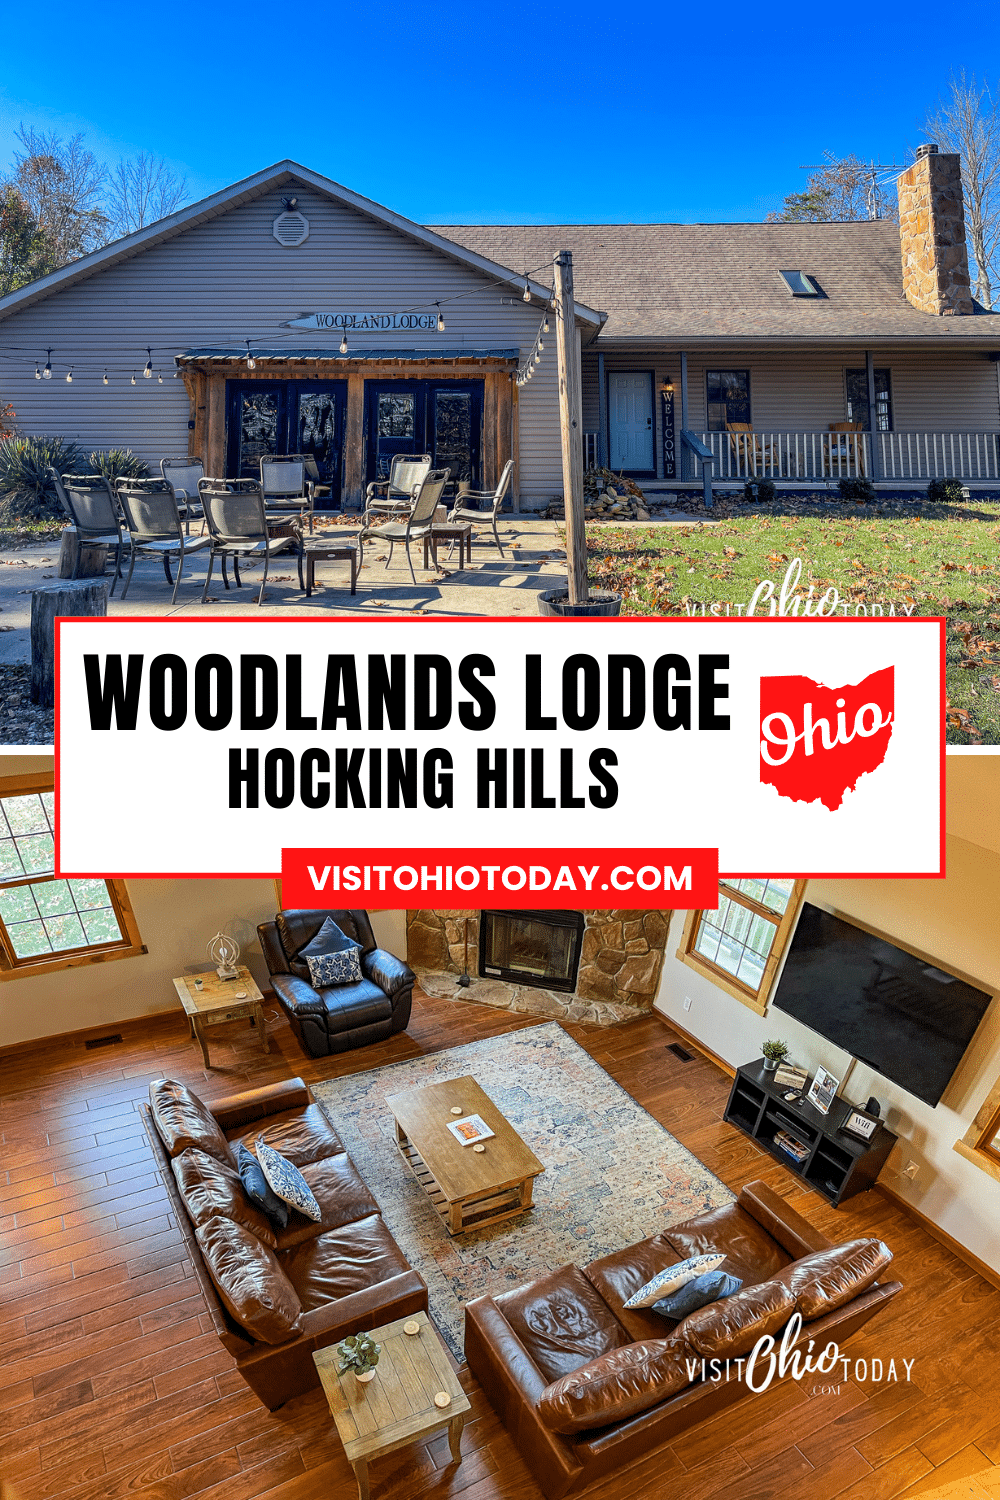 Escape to The Woodland Lodge in Hocking Hills – a 5-bedroom retreat with a hot tub, theater, and game room, just 5.6 miles from Hocking Hills State Park. Experience ultimate comfort, outdoor bliss, and the joy of giving back with 5% of each rental supporting chosen charities.